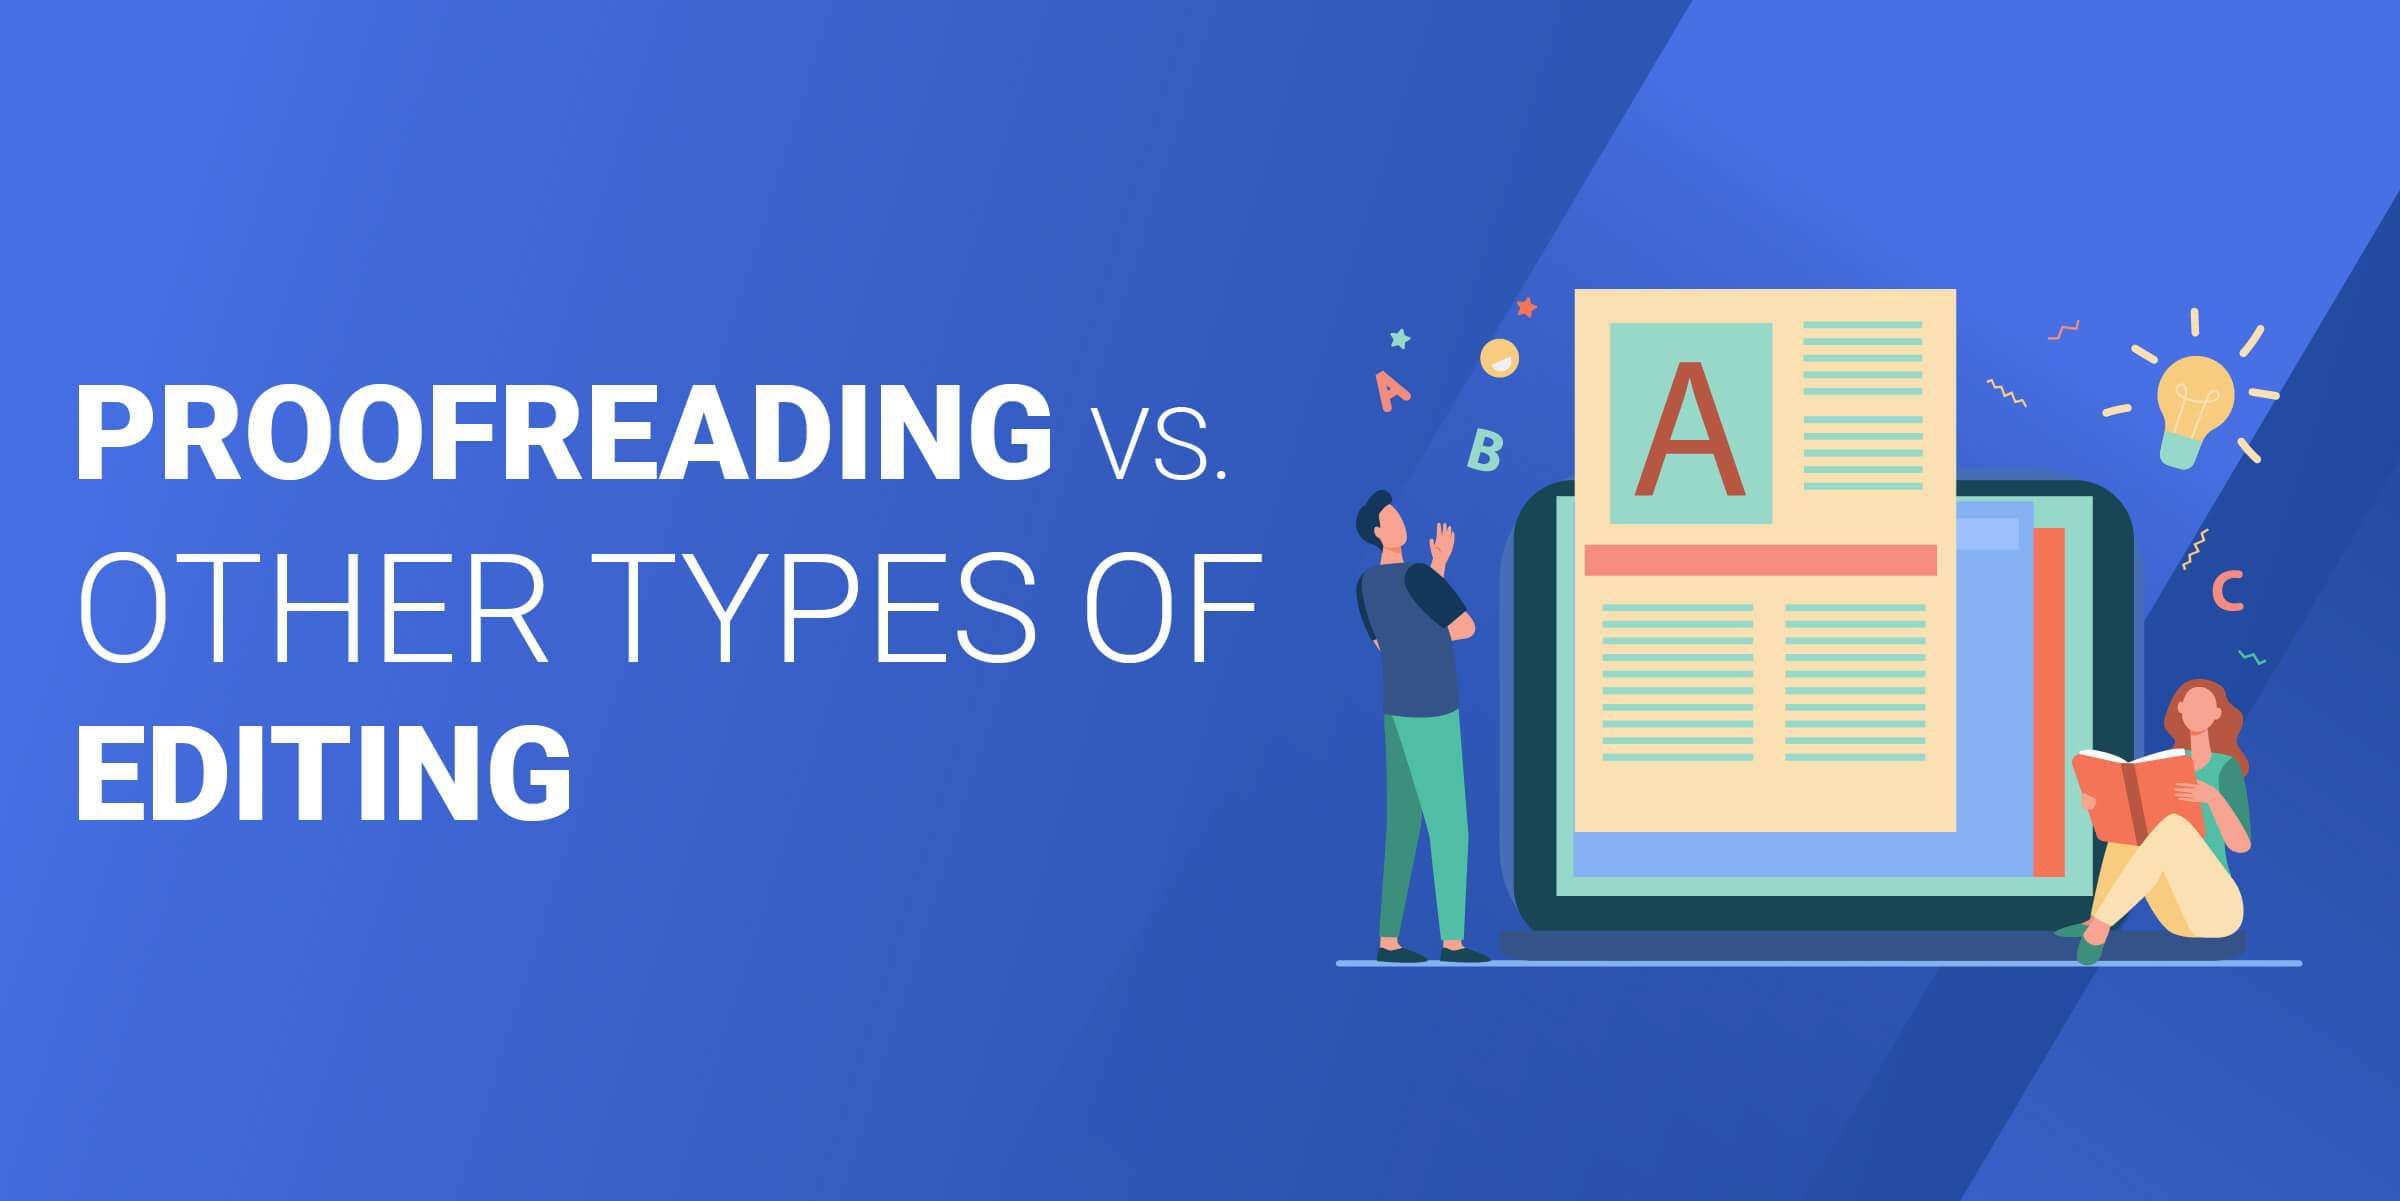 Proofreading vs Other Types of Editing